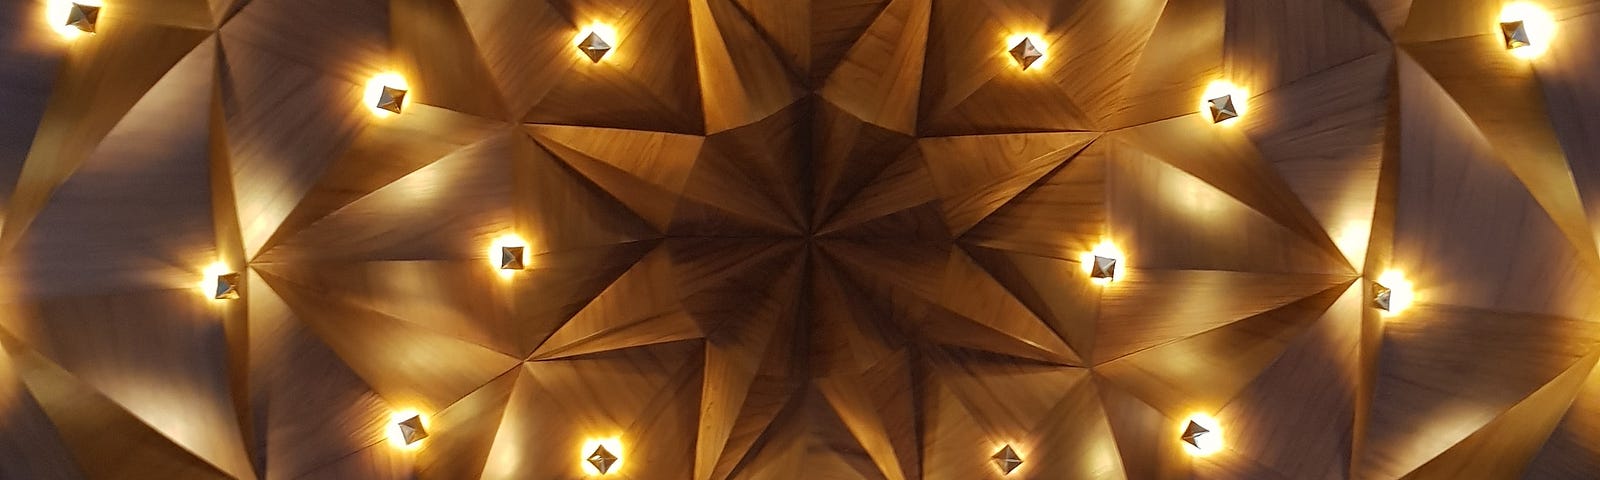 Wooden ceileing in mandala shape with lighting connecting lines as stars.